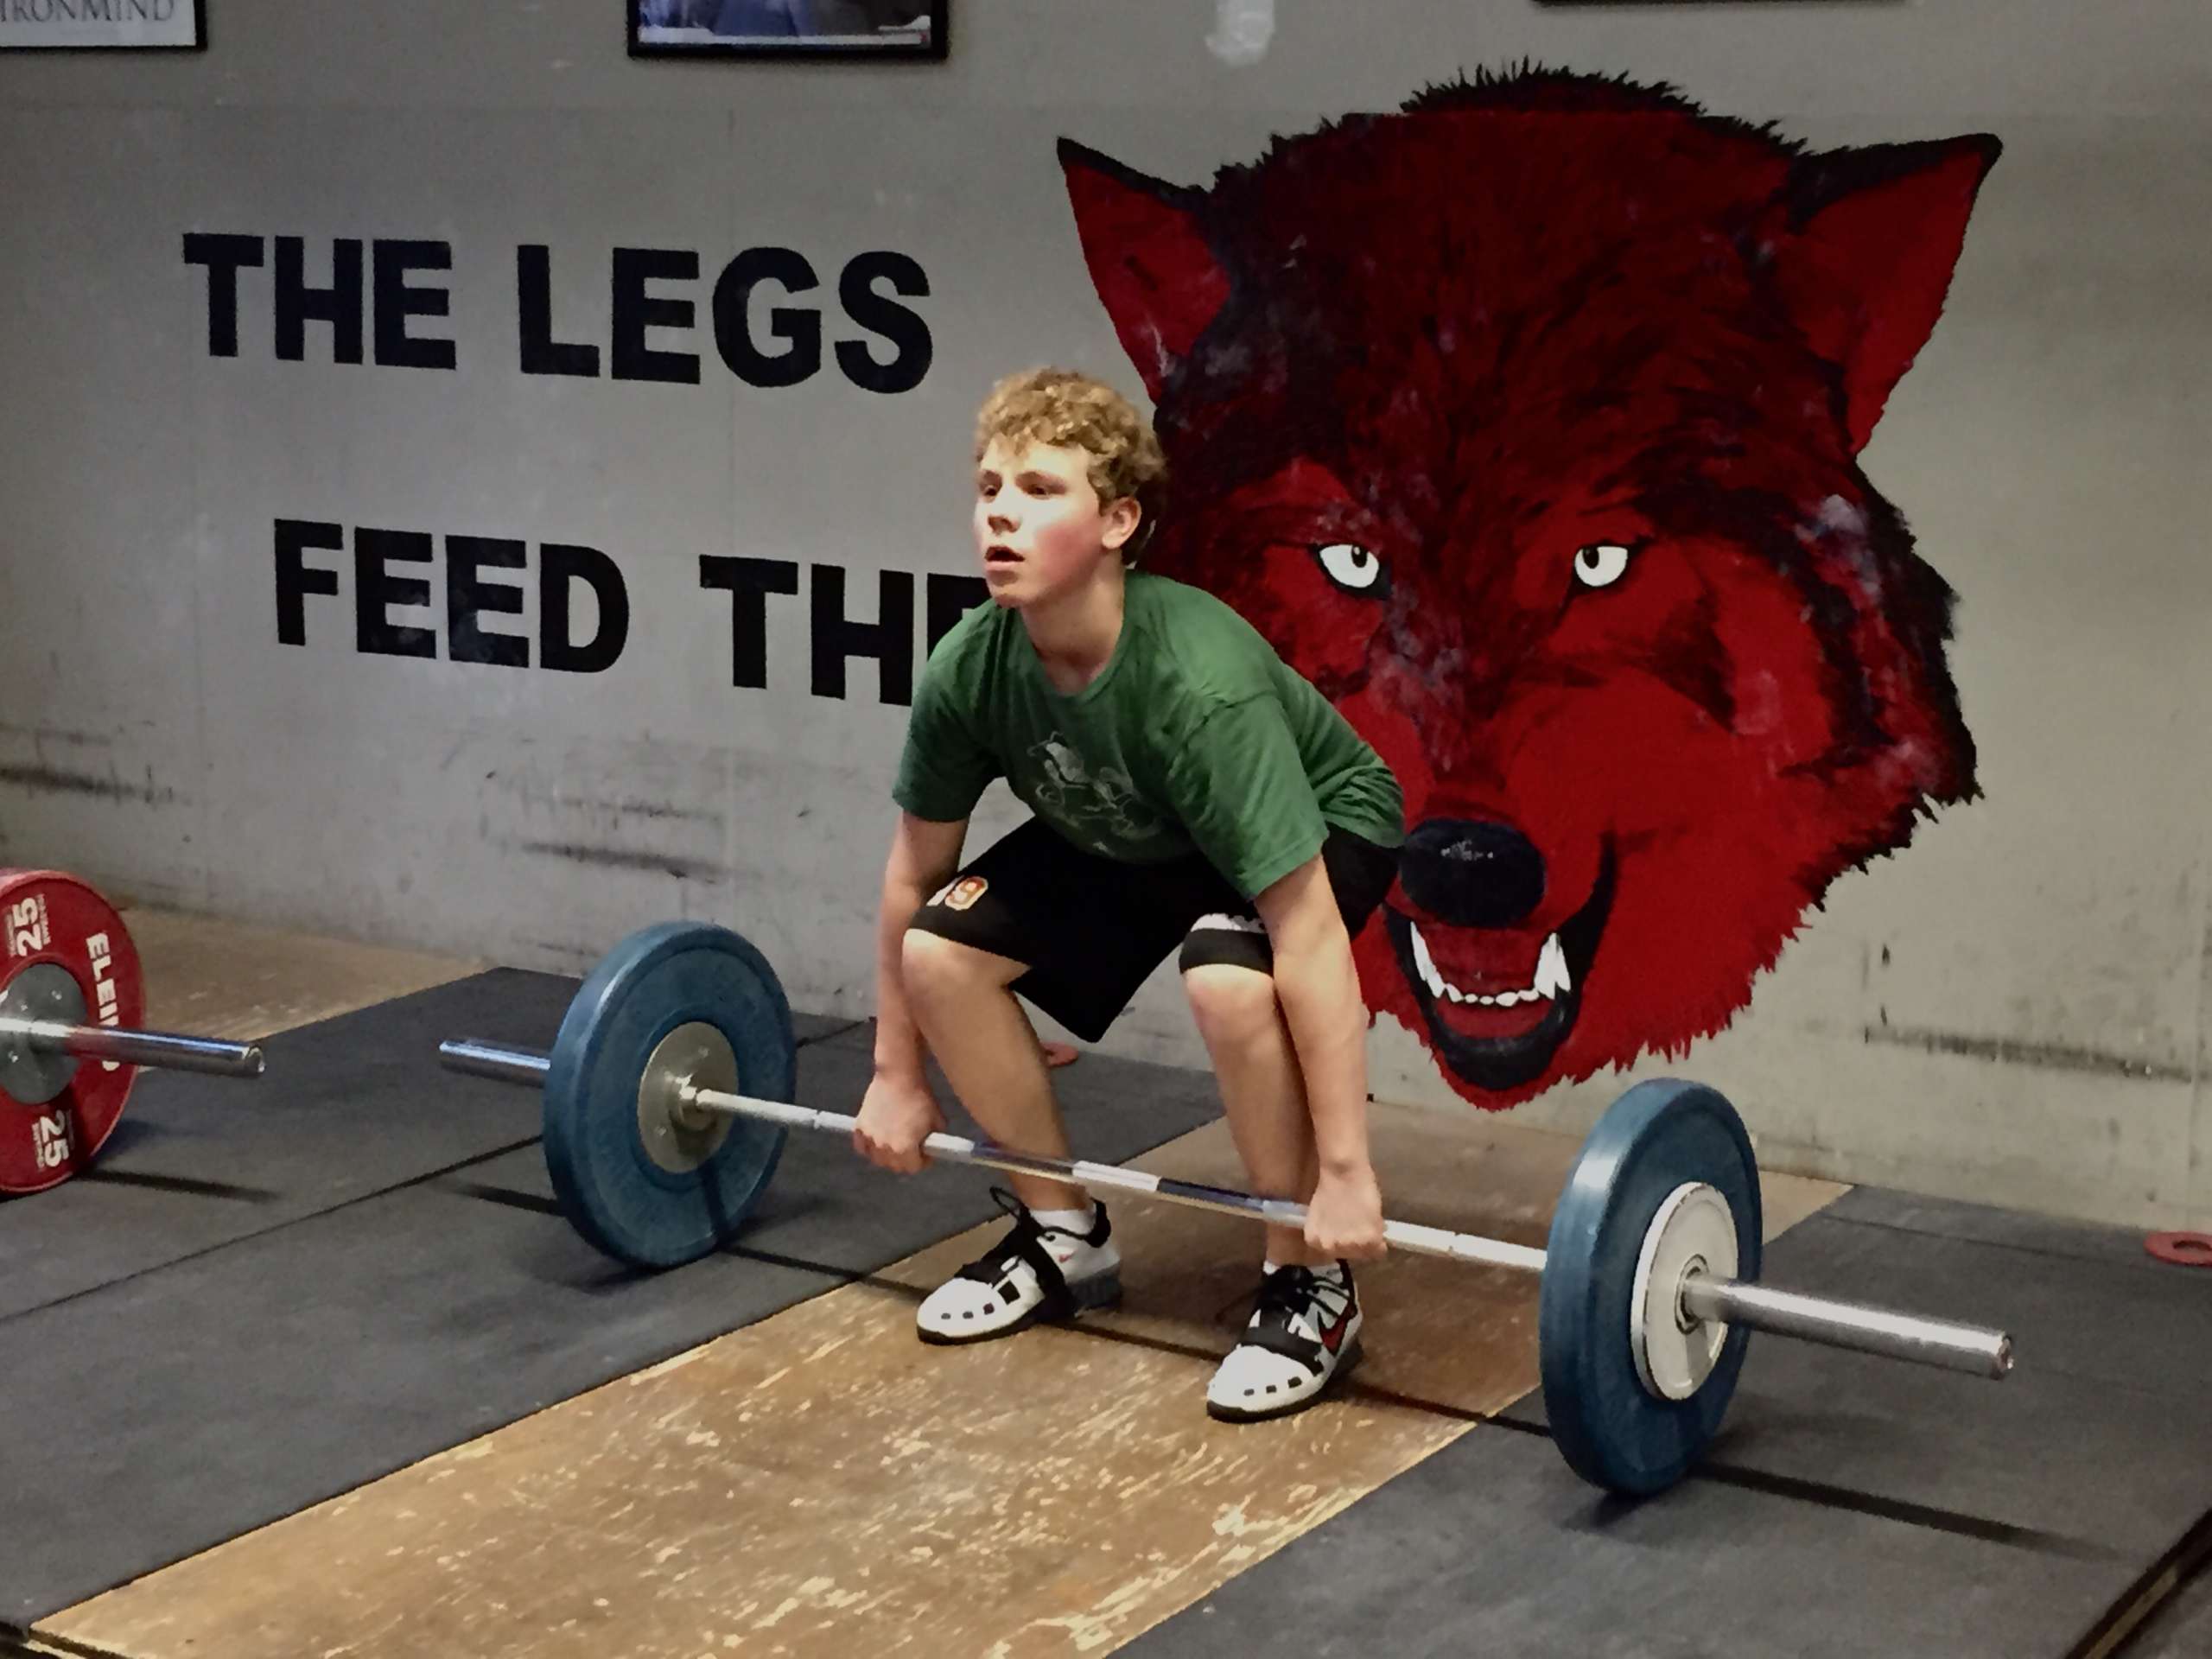 A young boy about to lift weight